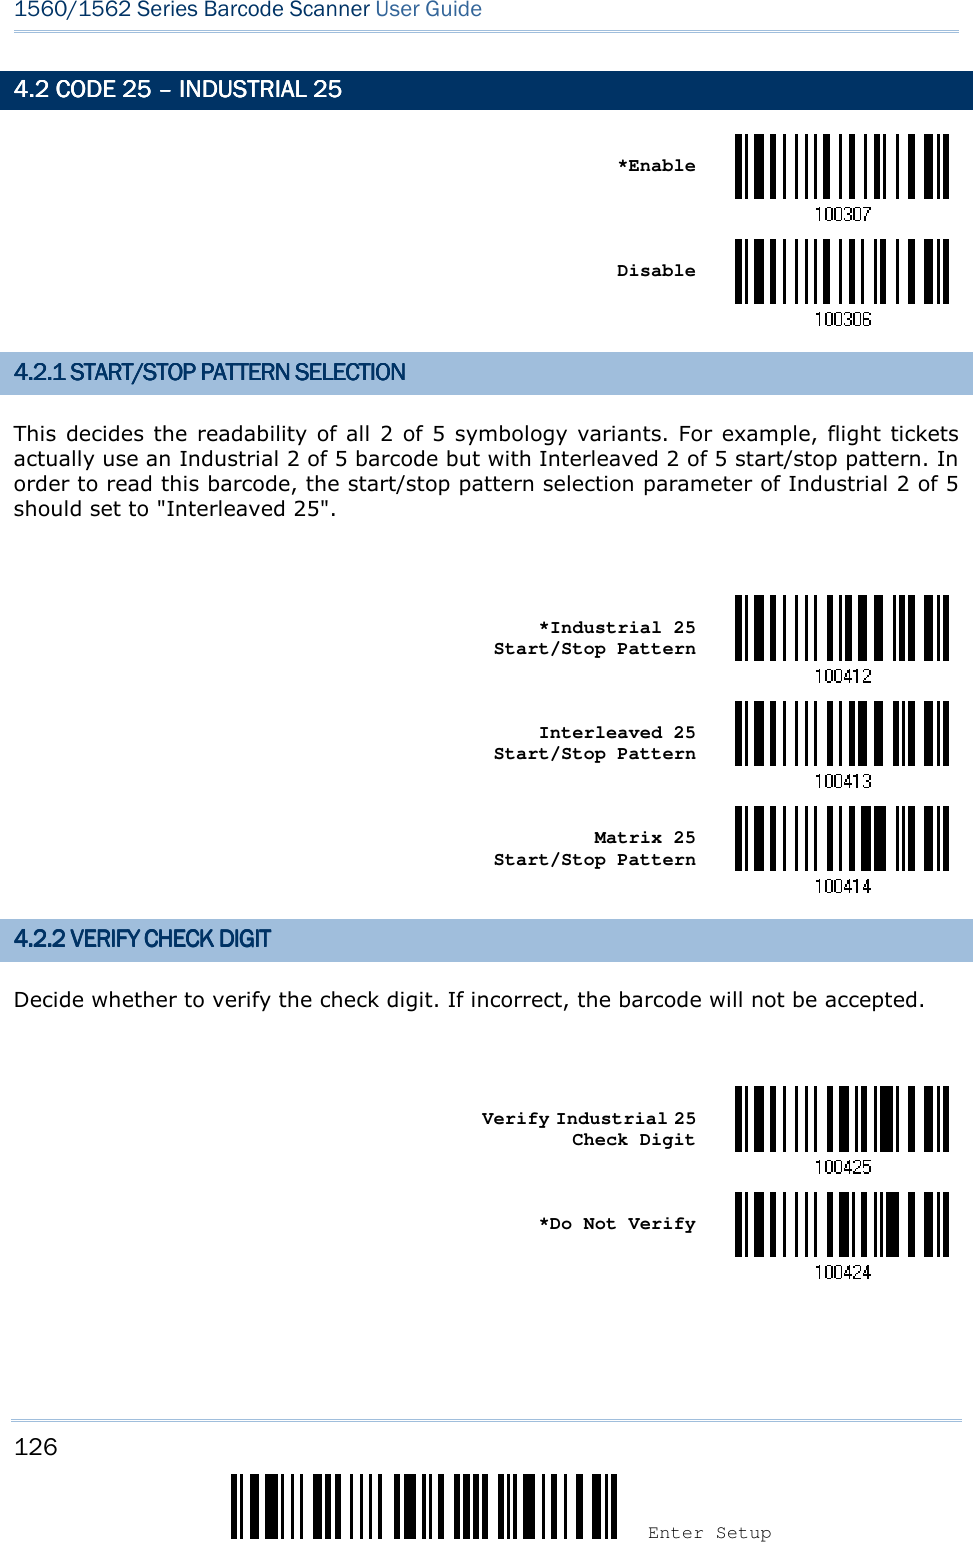 126 Enter Setup 1560/1562 Series Barcode Scanner User Guide  4.2 CODE 254.2 CODE 254.2 CODE 254.2 CODE 25    ––––    INDUSTRIAL 25INDUSTRIAL 25INDUSTRIAL 25INDUSTRIAL 25       *Enable     Disable  4.2.1 4.2.1 4.2.1 4.2.1 START/START/START/START/STOP PATTERN SELECTISTOP PATTERN SELECTISTOP PATTERN SELECTISTOP PATTERN SELECTIONONONON    This decides the  readability of all 2 of 5 symbology variants. For  example, flight tickets actually use an Industrial 2 of 5 barcode but with Interleaved 2 of 5 start/stop pattern. In order to read this barcode, the start/stop pattern selection parameter of Industrial 2 of 5 should set to &quot;Interleaved 25&quot;.     *Industrial 25 Start/Stop Pattern     Interleaved 25 Start/Stop Pattern     Matrix 25   Start/Stop Pattern  4.2.2 4.2.2 4.2.2 4.2.2 VERIFY CHECK DIGITVERIFY CHECK DIGITVERIFY CHECK DIGITVERIFY CHECK DIGIT    Decide whether to verify the check digit. If incorrect, the barcode will not be accepted.     Verify Industrial 25 Check Digit     *Do Not Verify   